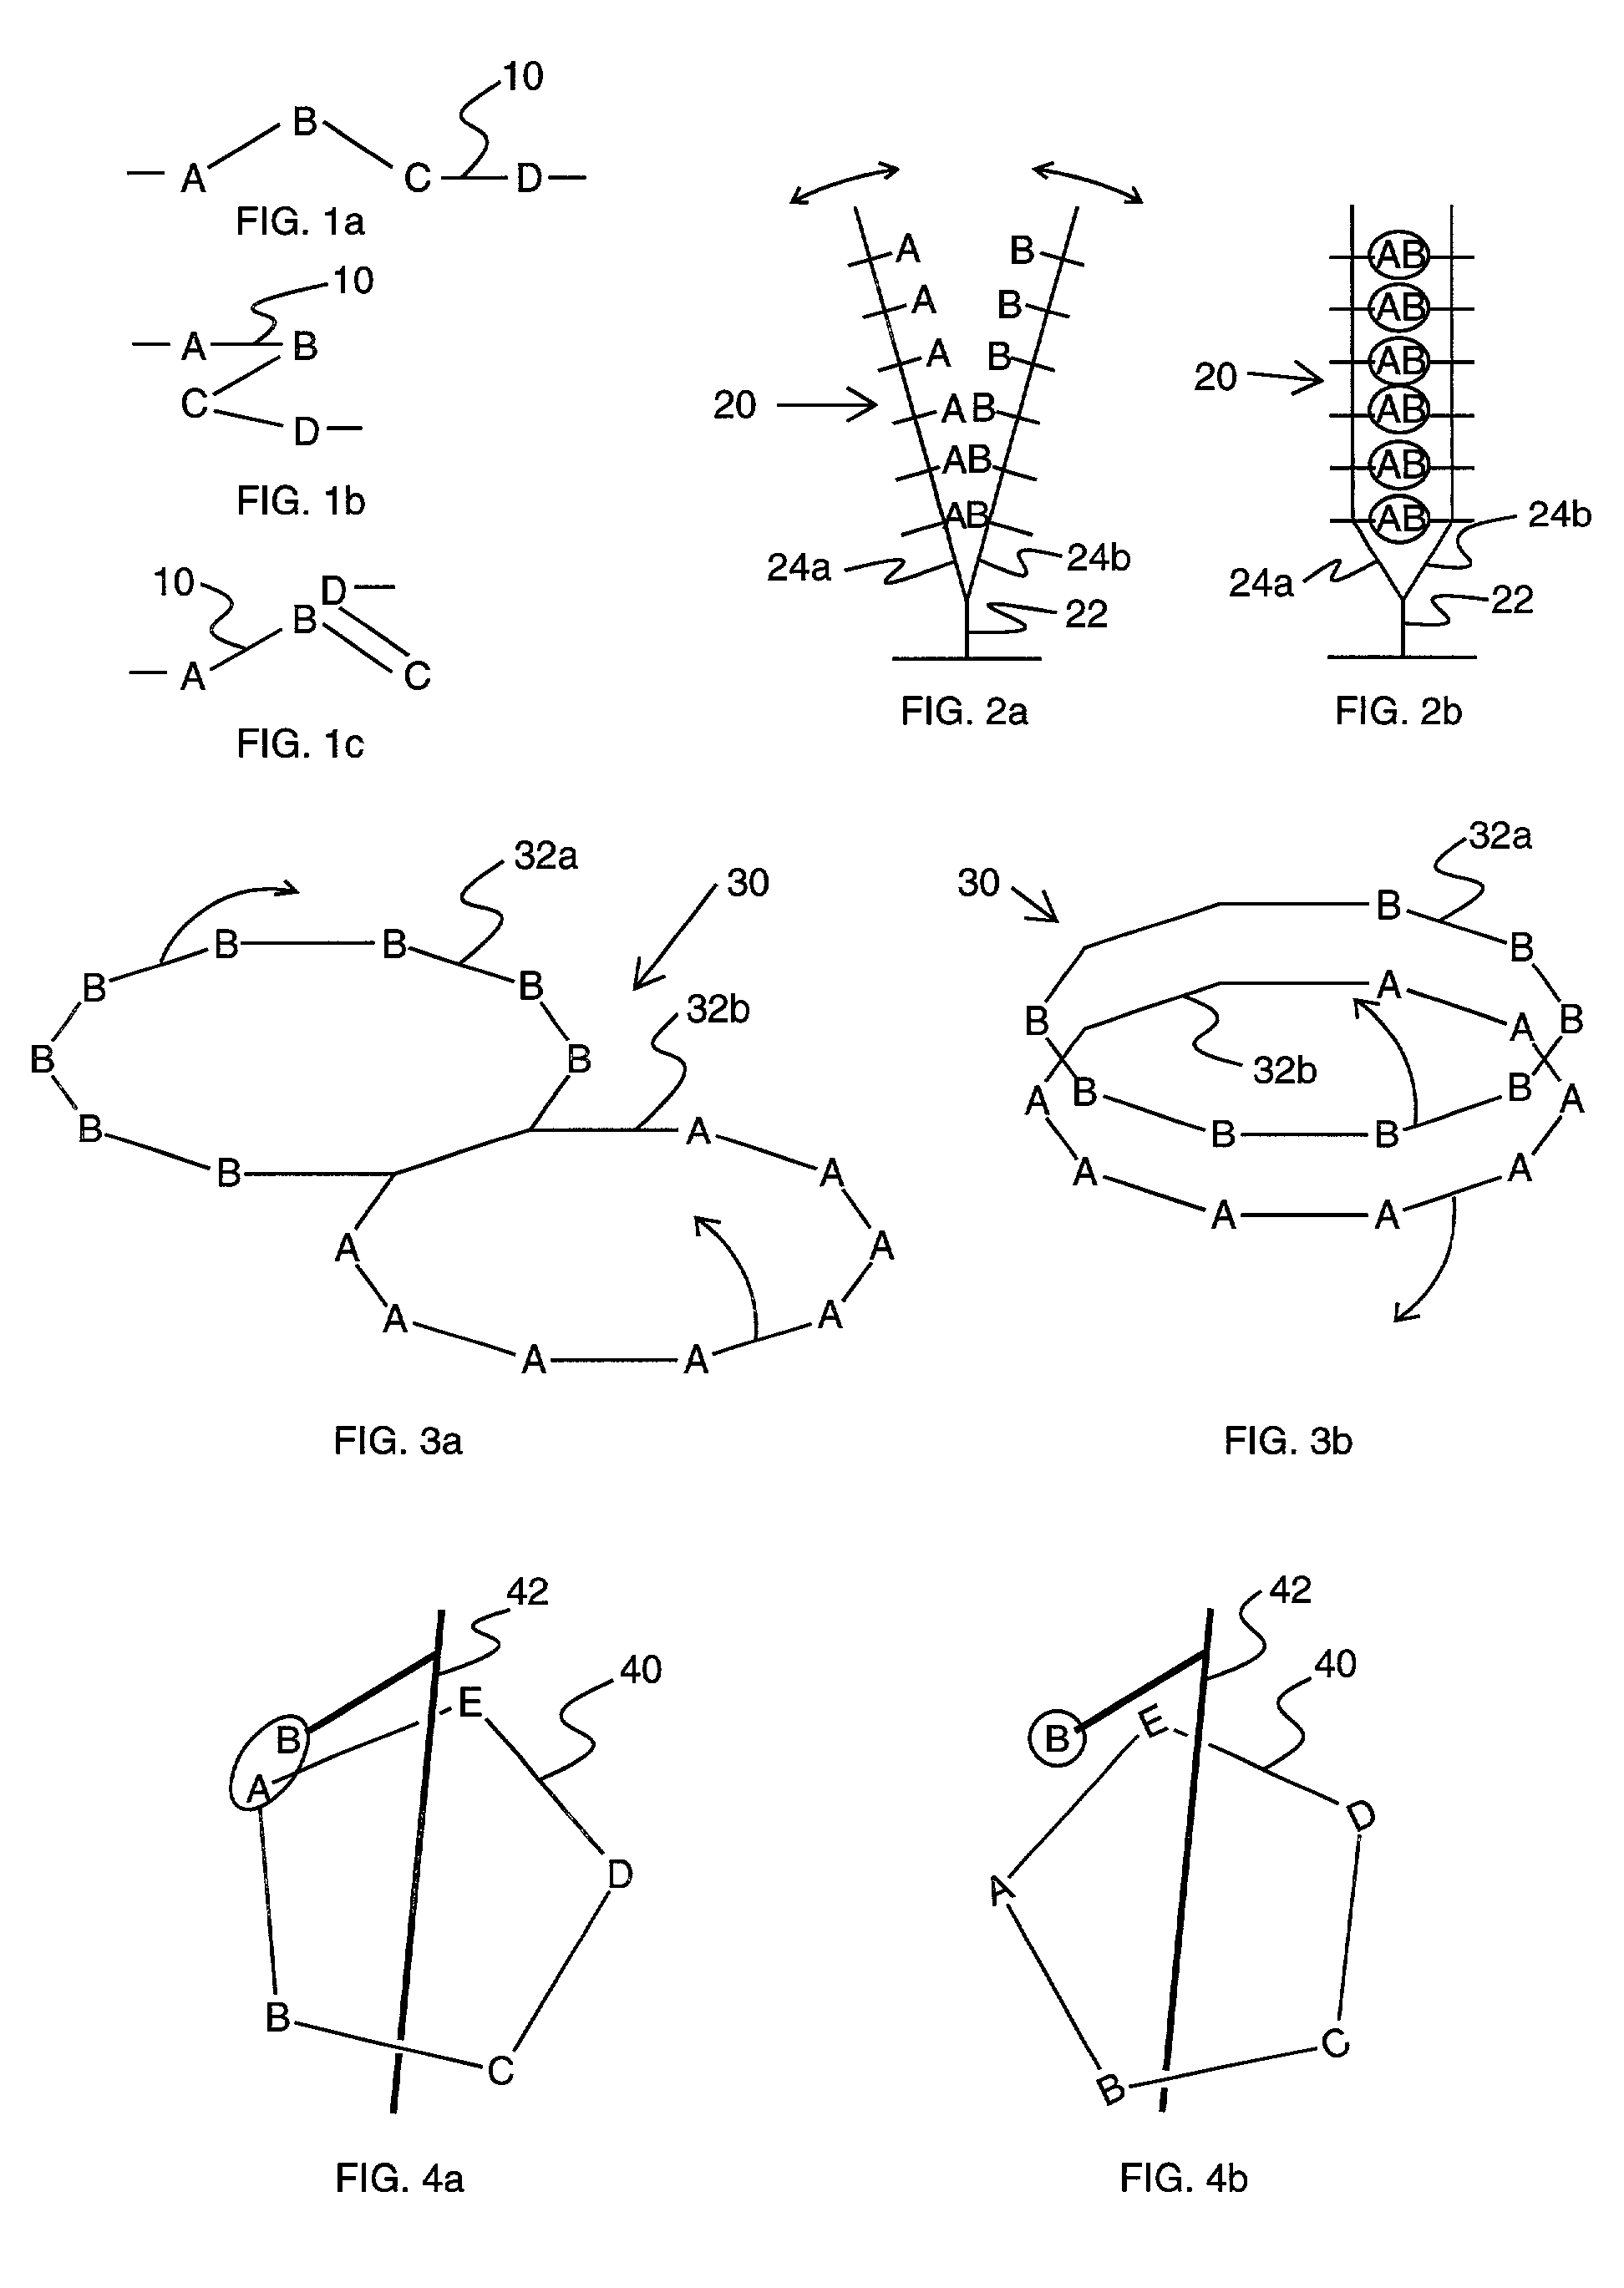 Organic molecular film-based electronic switching device utilizing molecular-mechanical motion as the means to change the electronic properties of the molecule